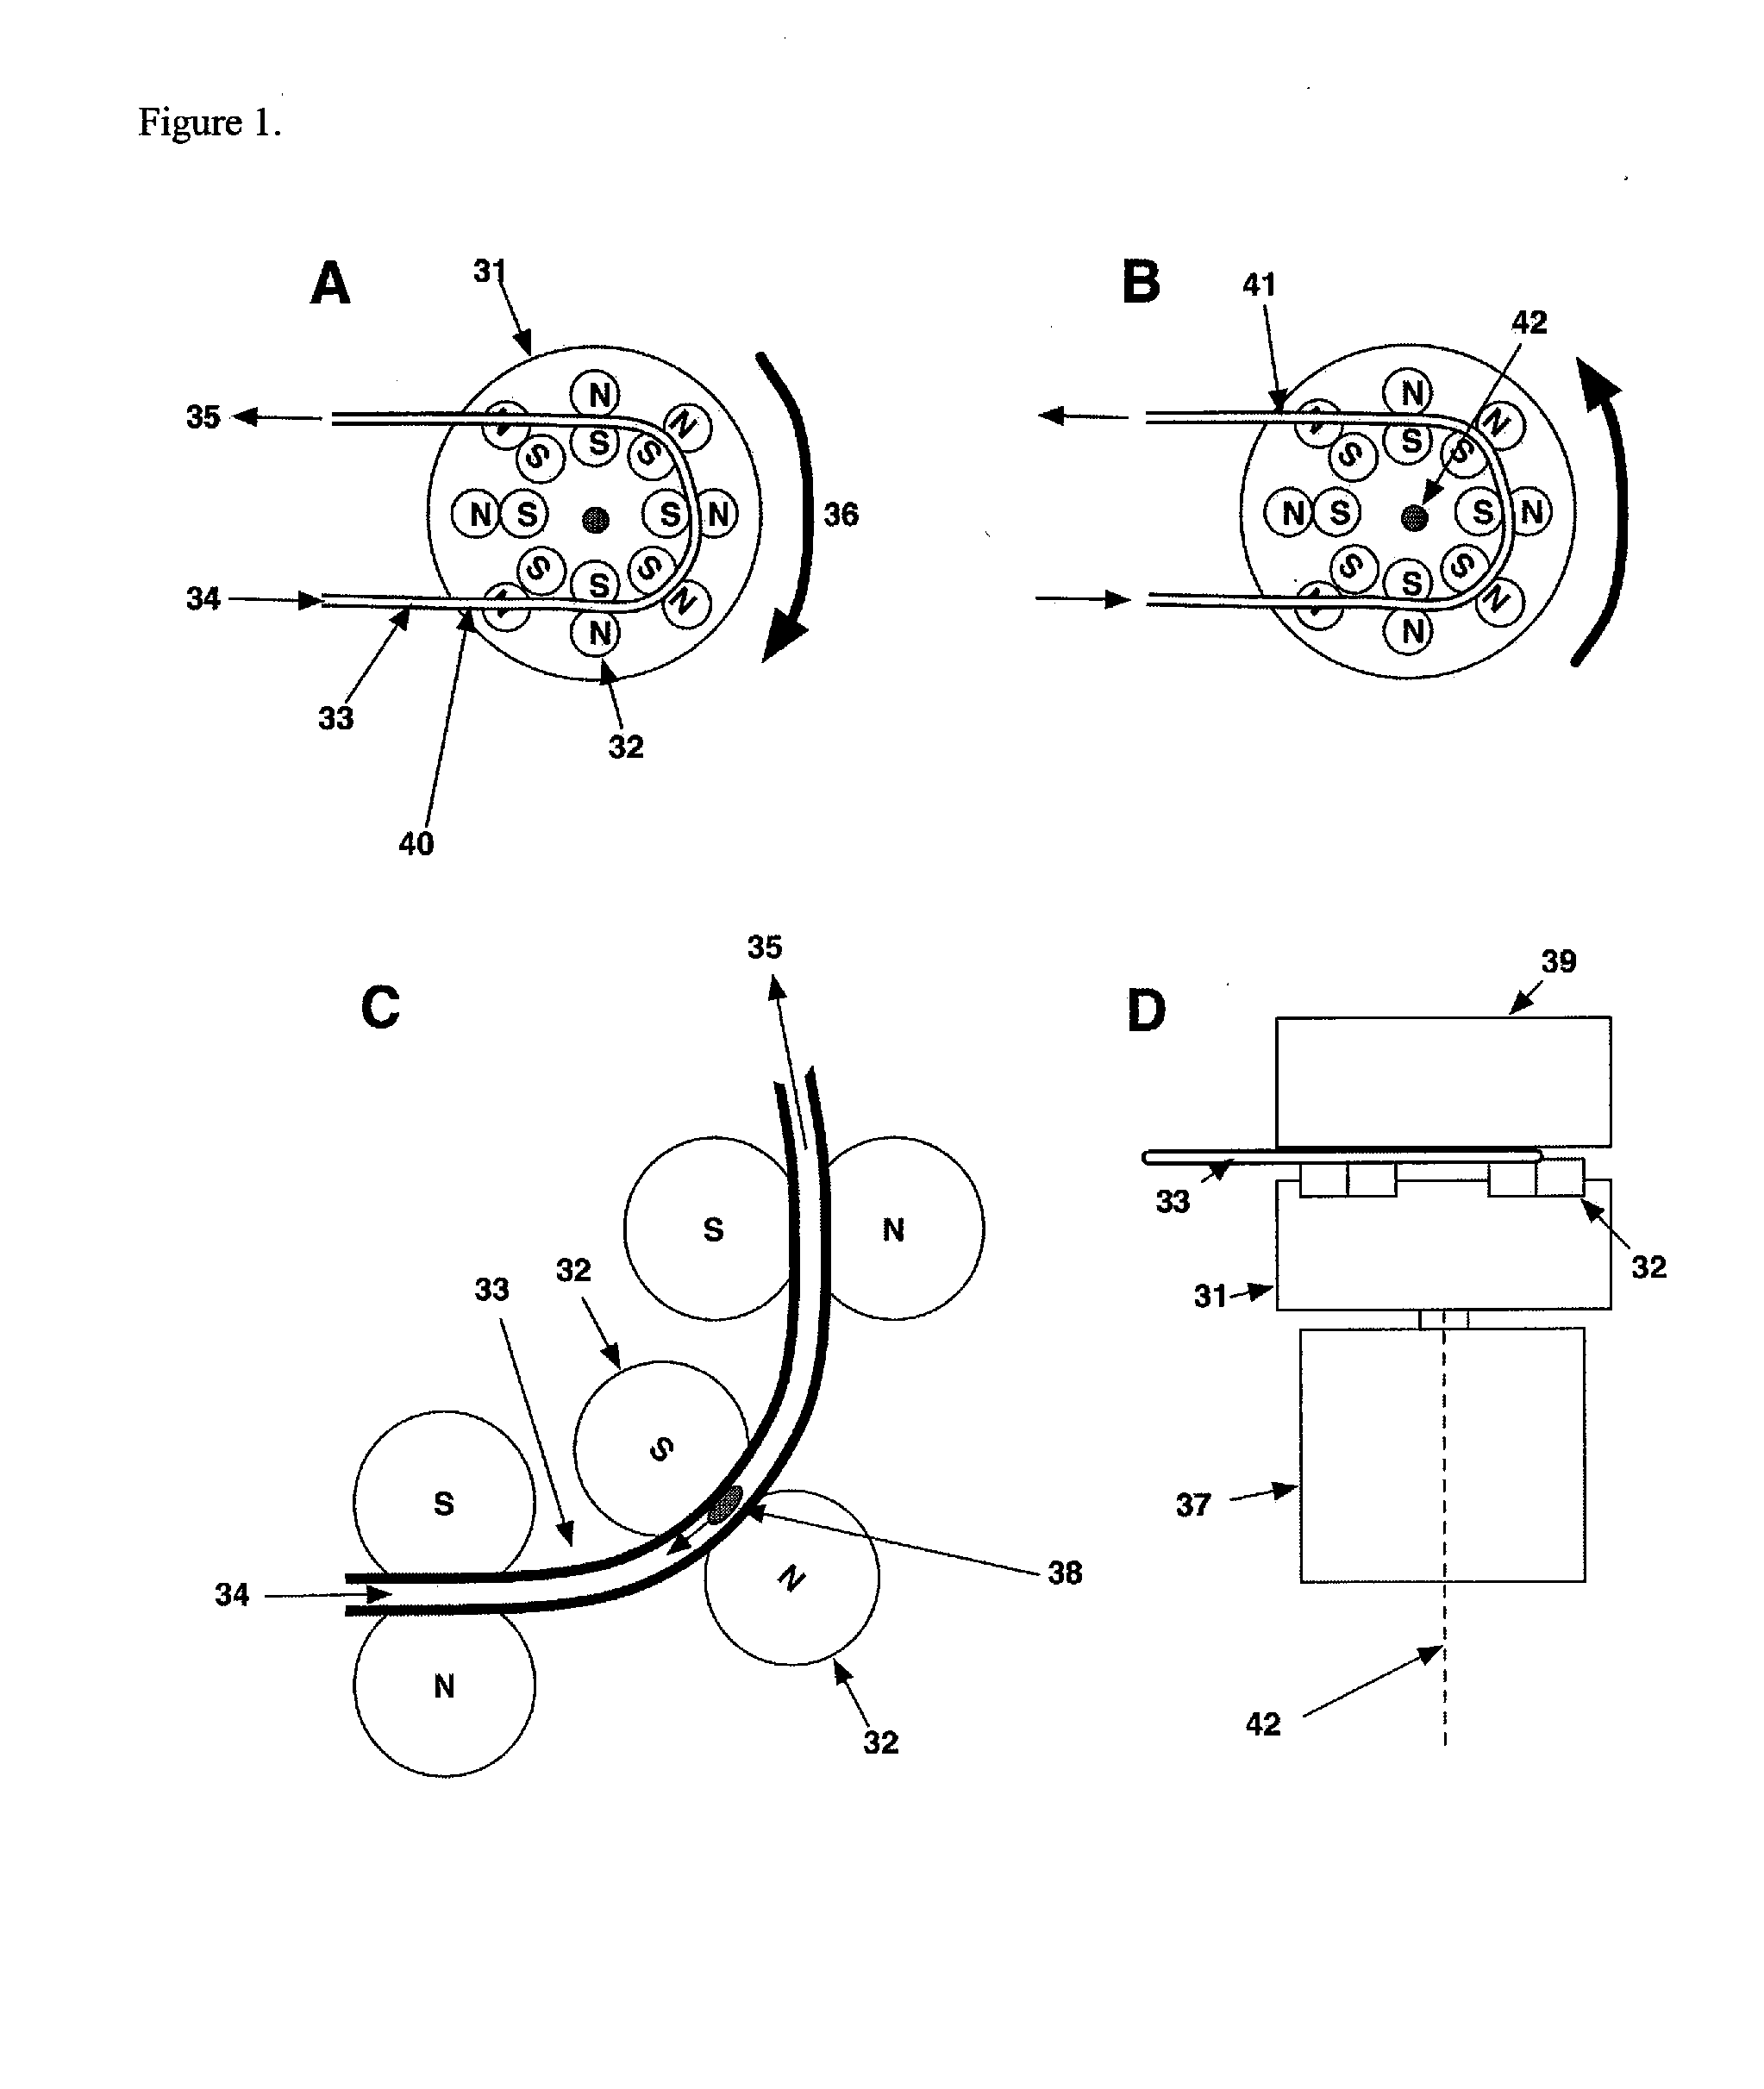 Magnetic Bead Trap and Mass Spectrometer Interface